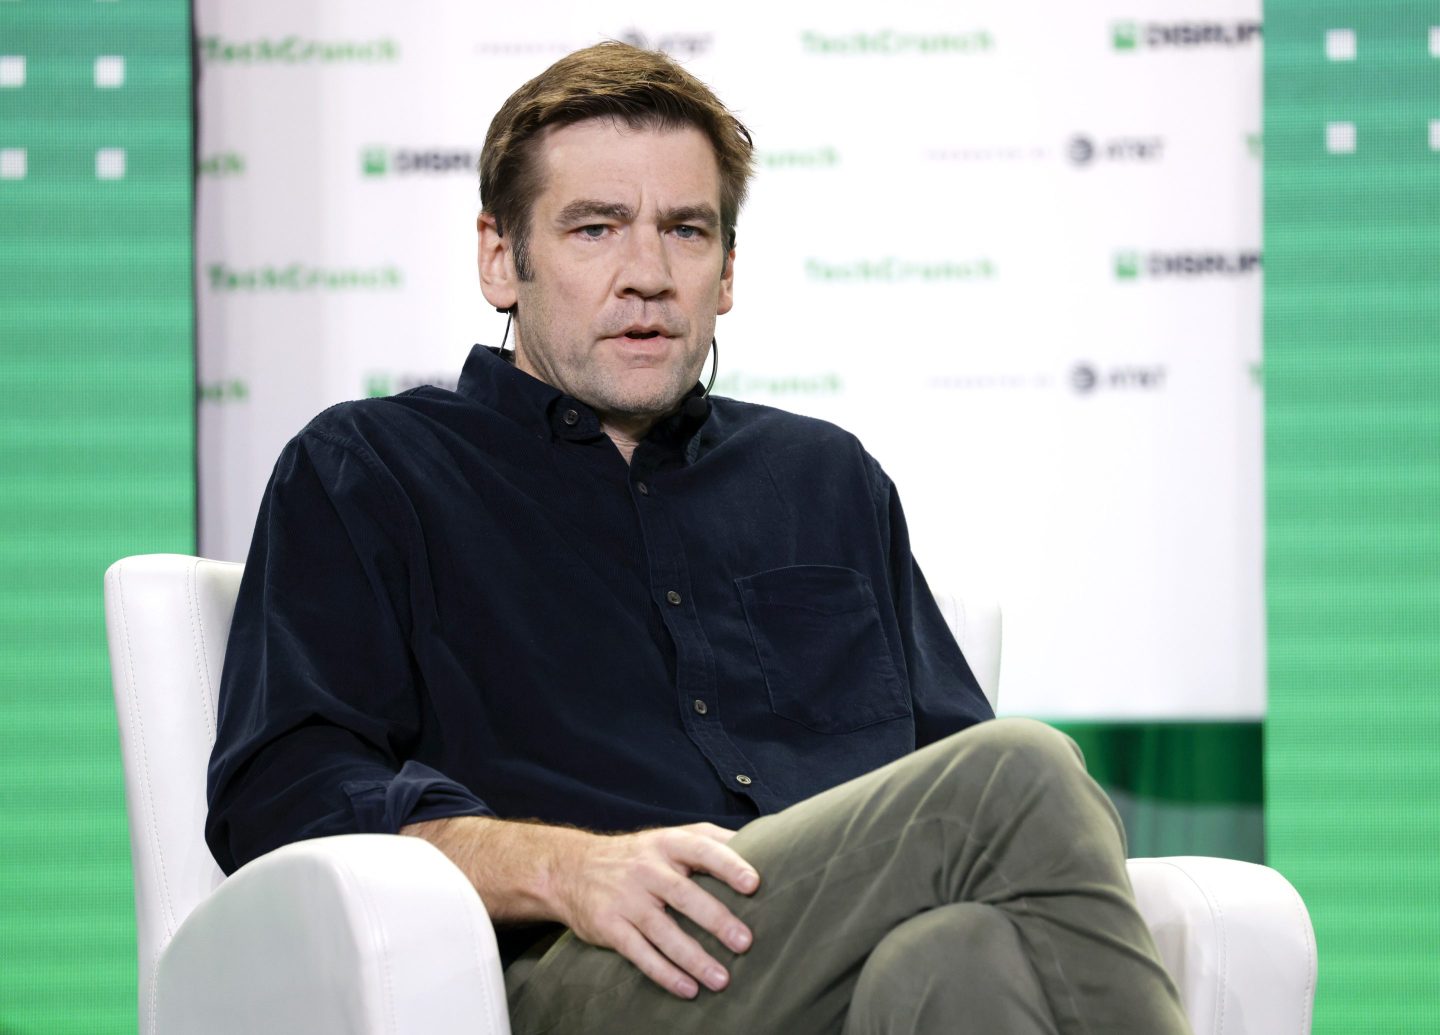 SAN FRANCISCO, CALIFORNIA &#8211; OCTOBER 18: Founder &amp; Managing Partner of a16z crypto Chris Dixon speaks onstage during TechCrunch Disrupt 2022 on October 18, 2022 in San Francisco, California. (Photo by Kimberly White/Getty Images for TechCrunch)